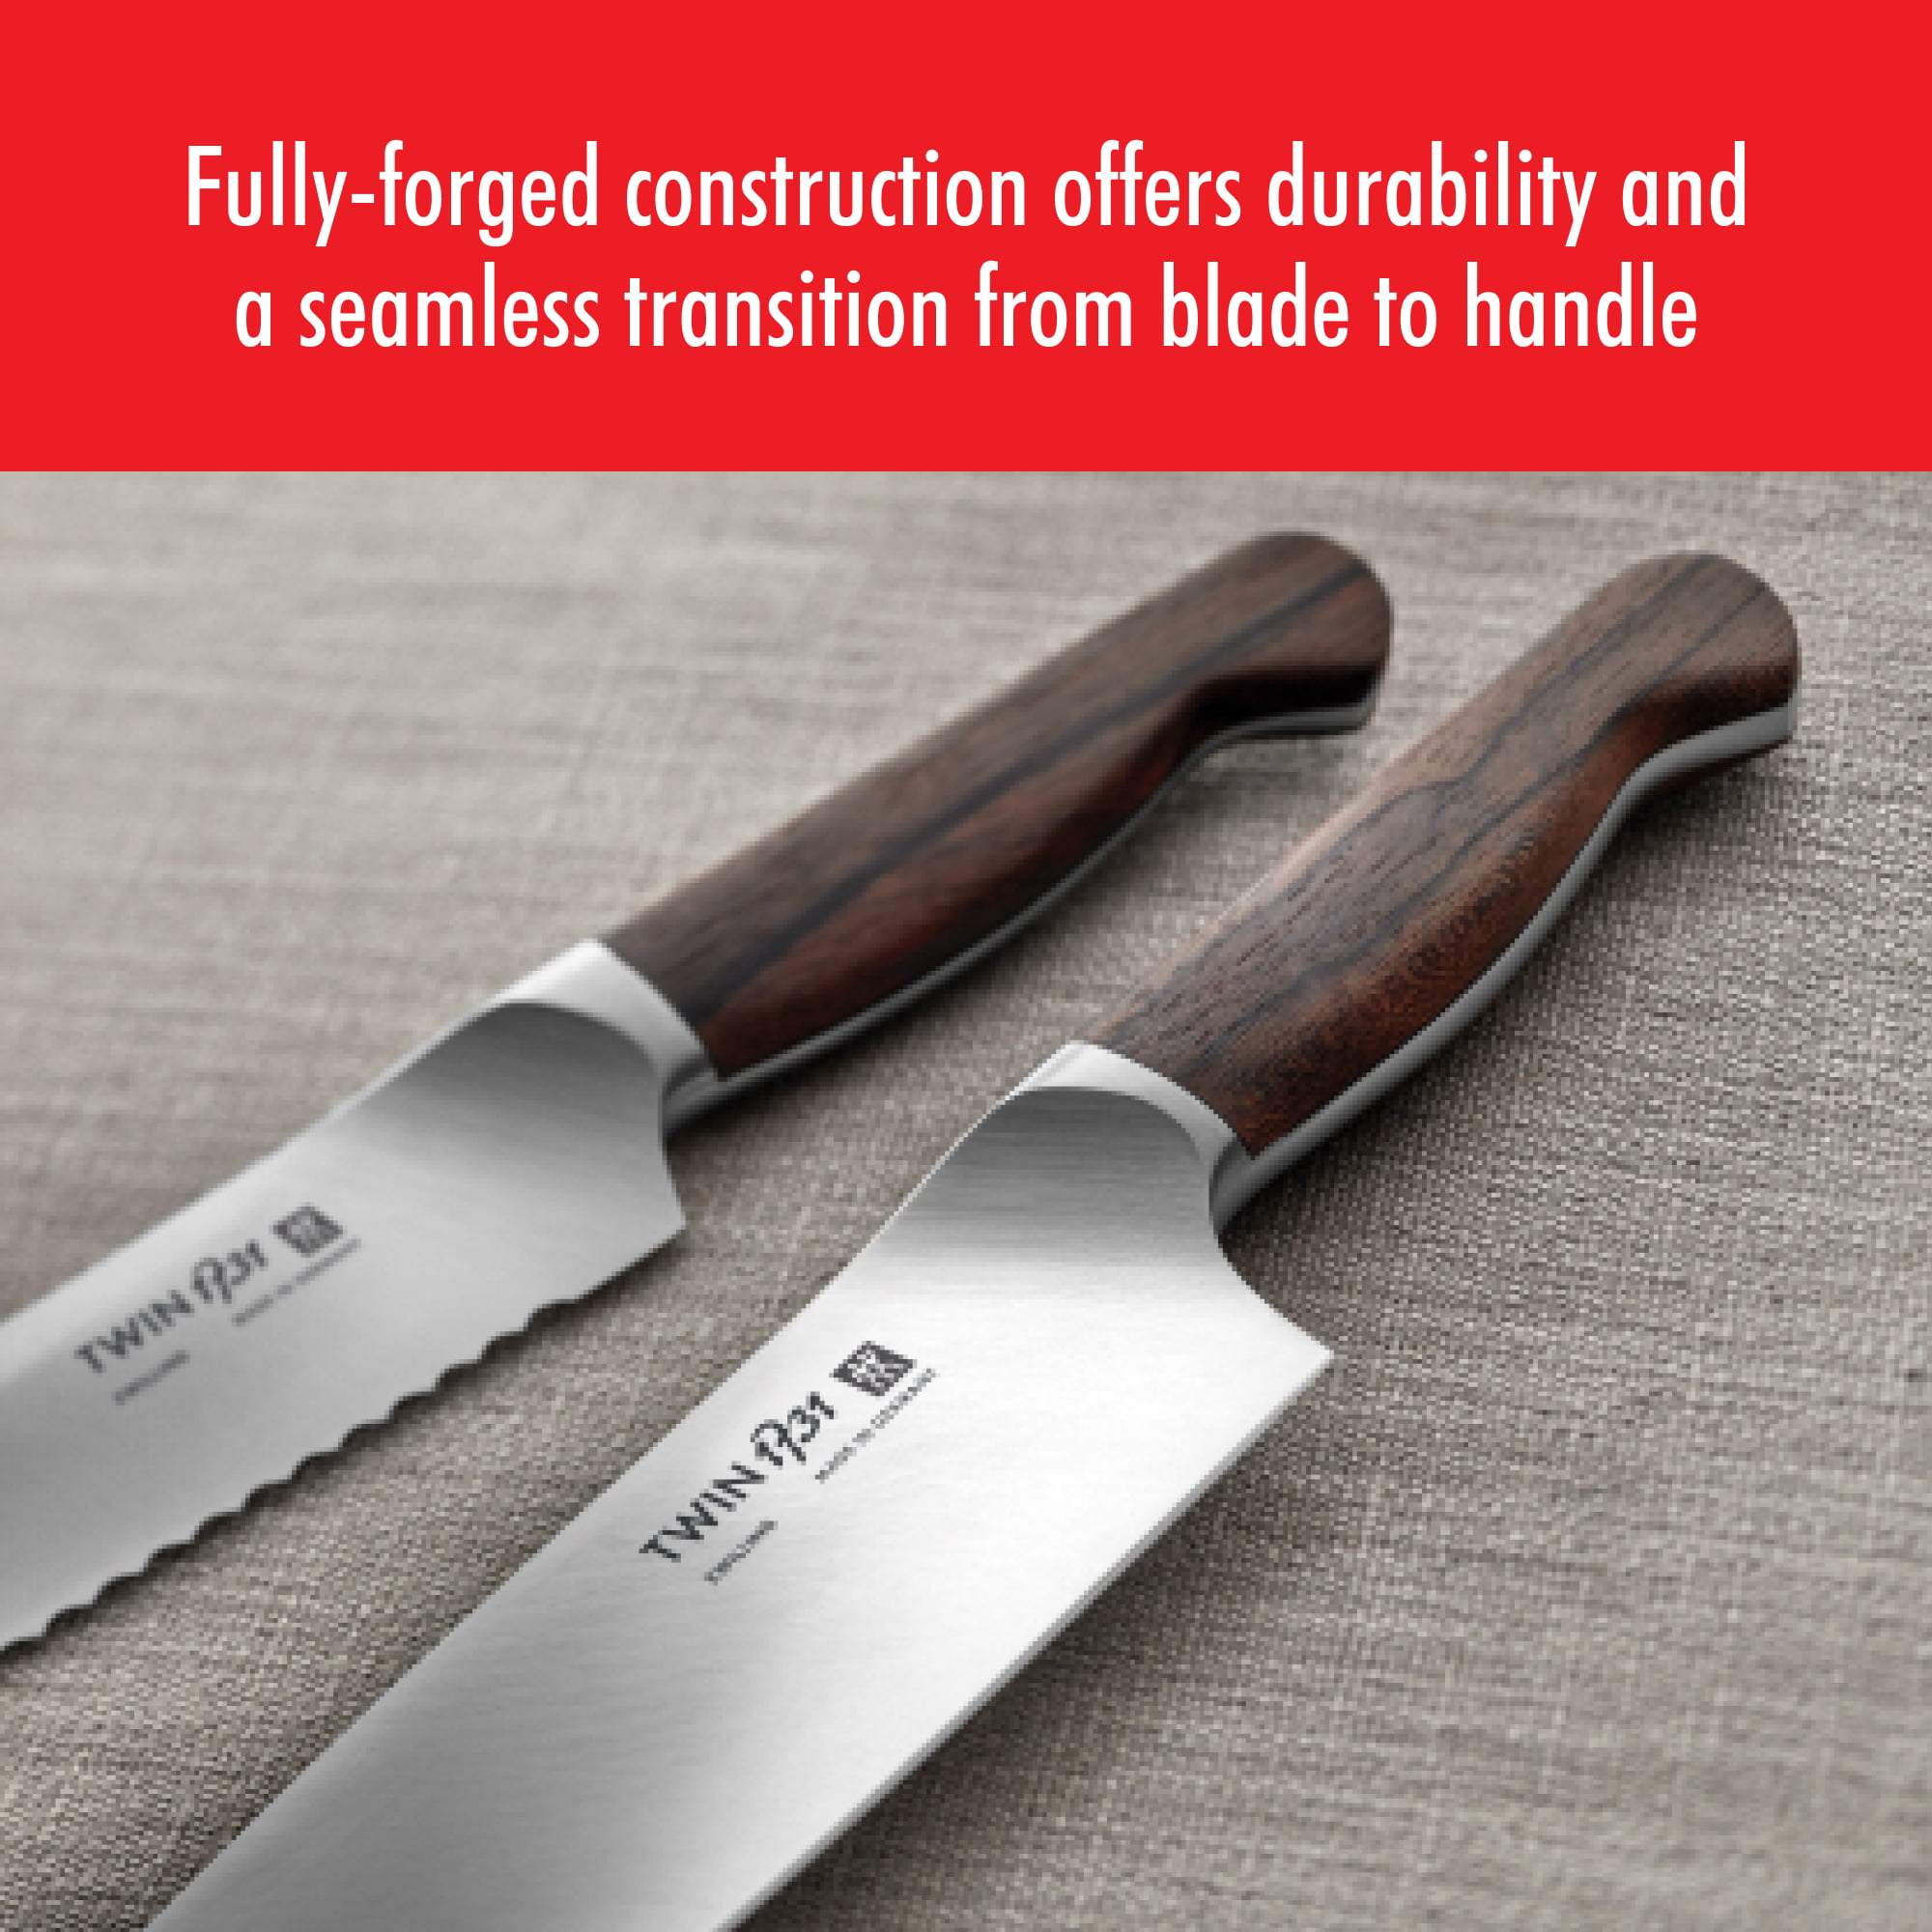 ZWILLING TWIN Signature 8-inch, Chef's knife — Better Home